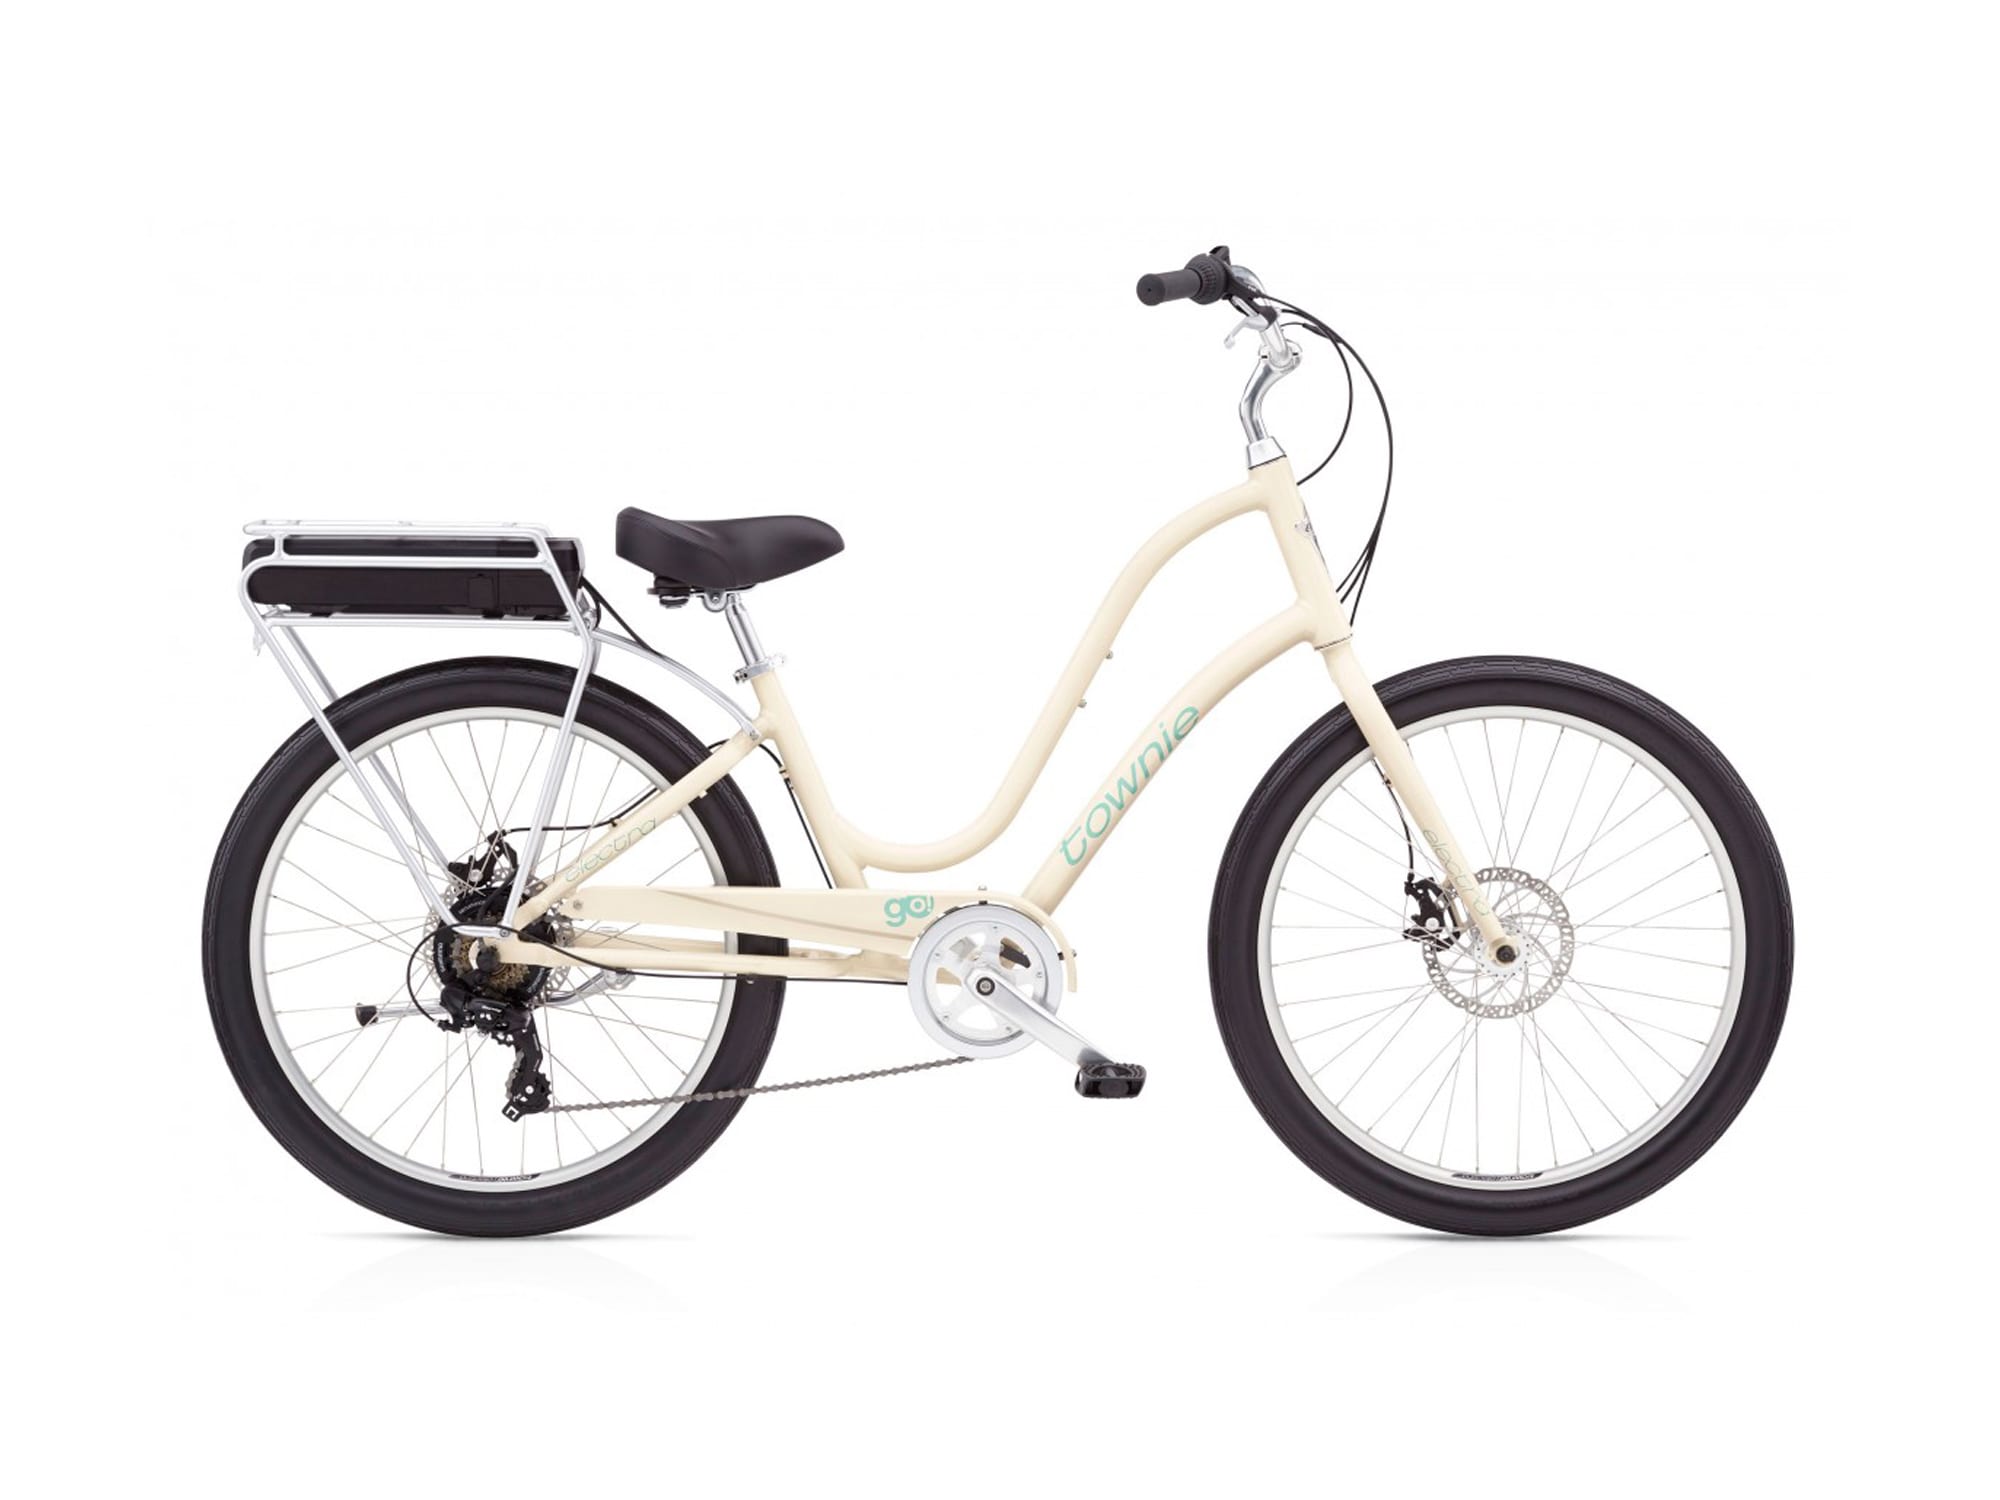 electra townie go 7d